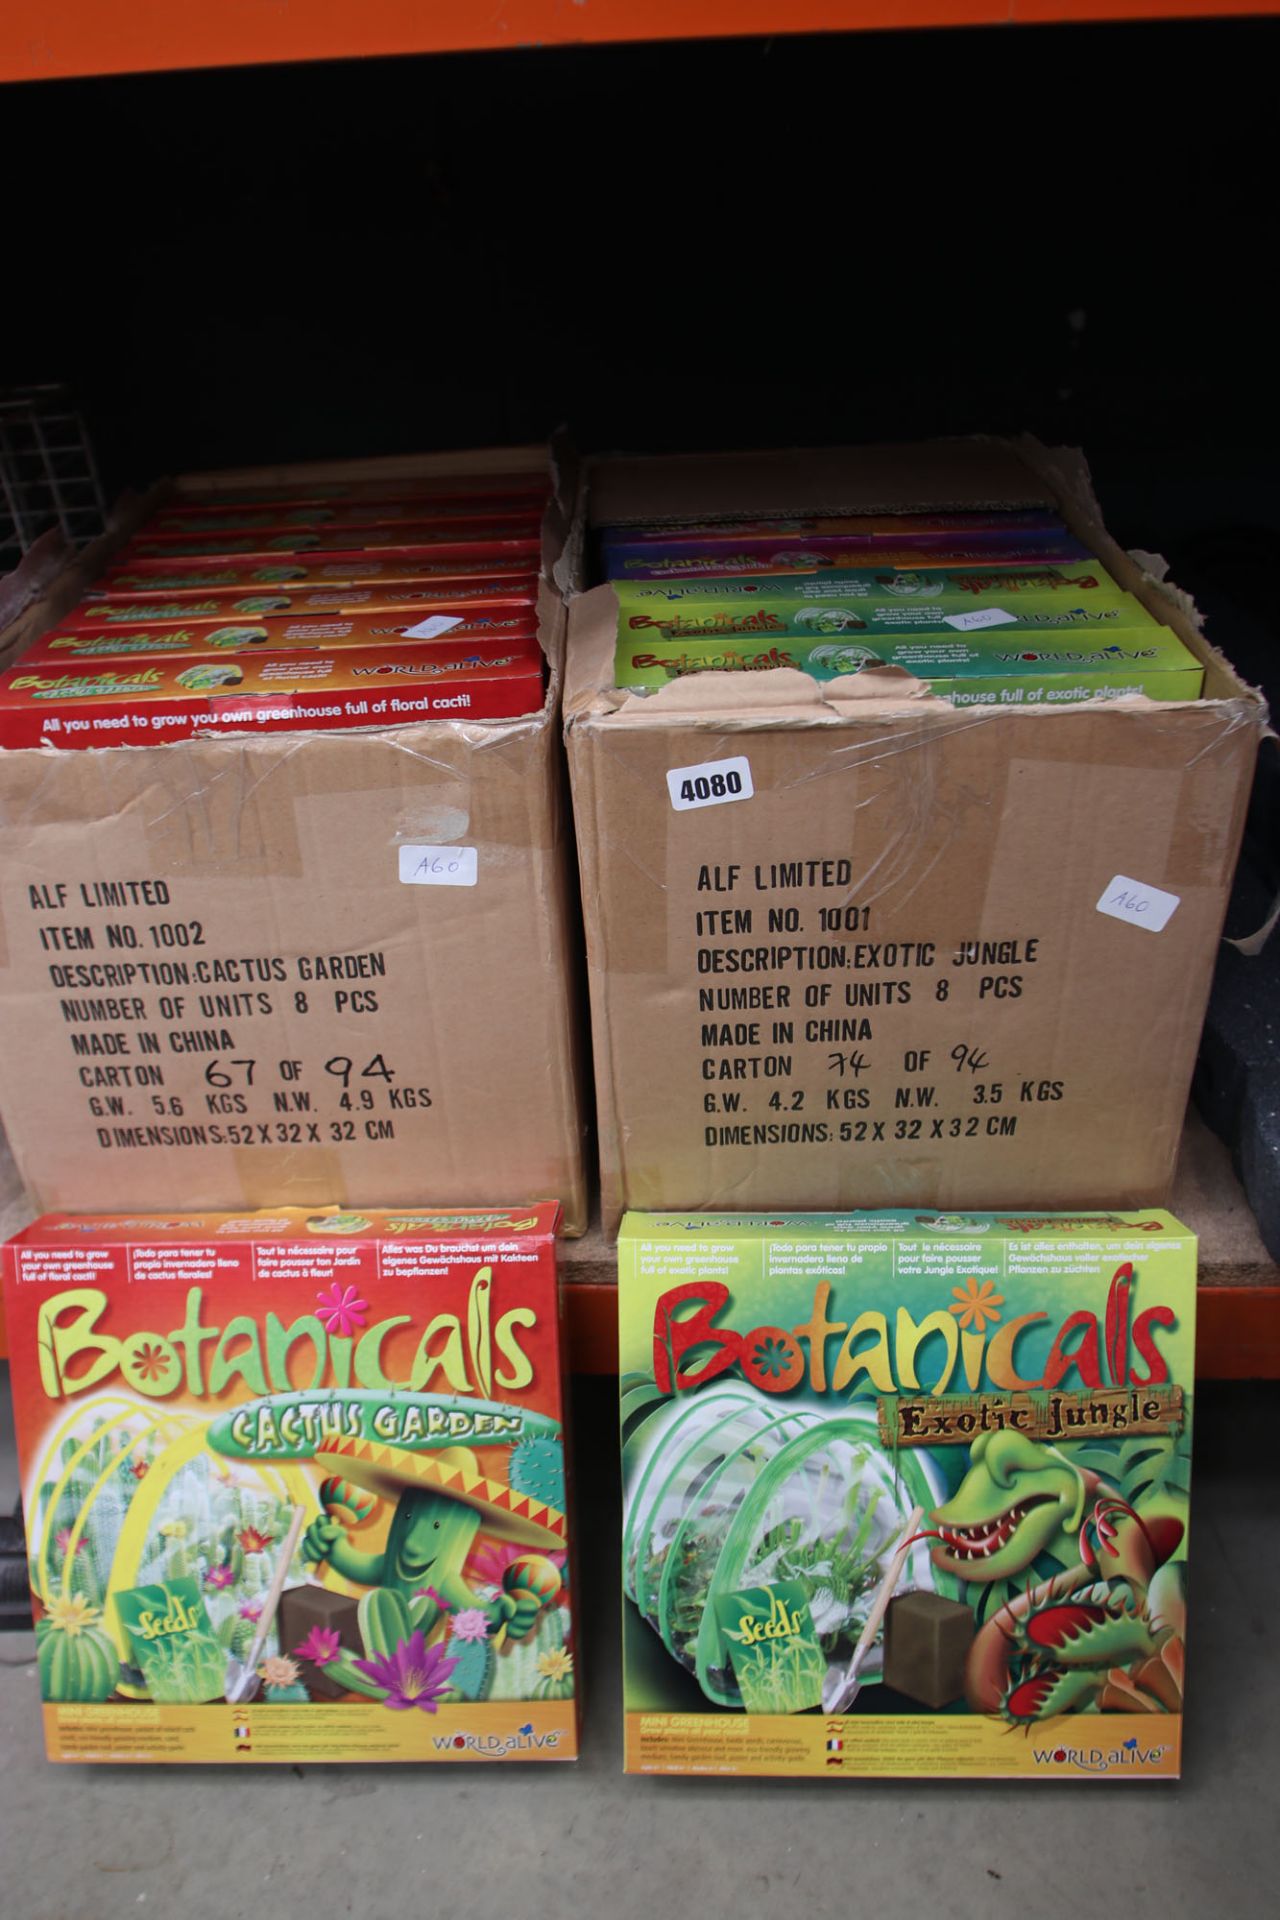 2 boxes of Botanicals World Alive Grow Your Own plant kits